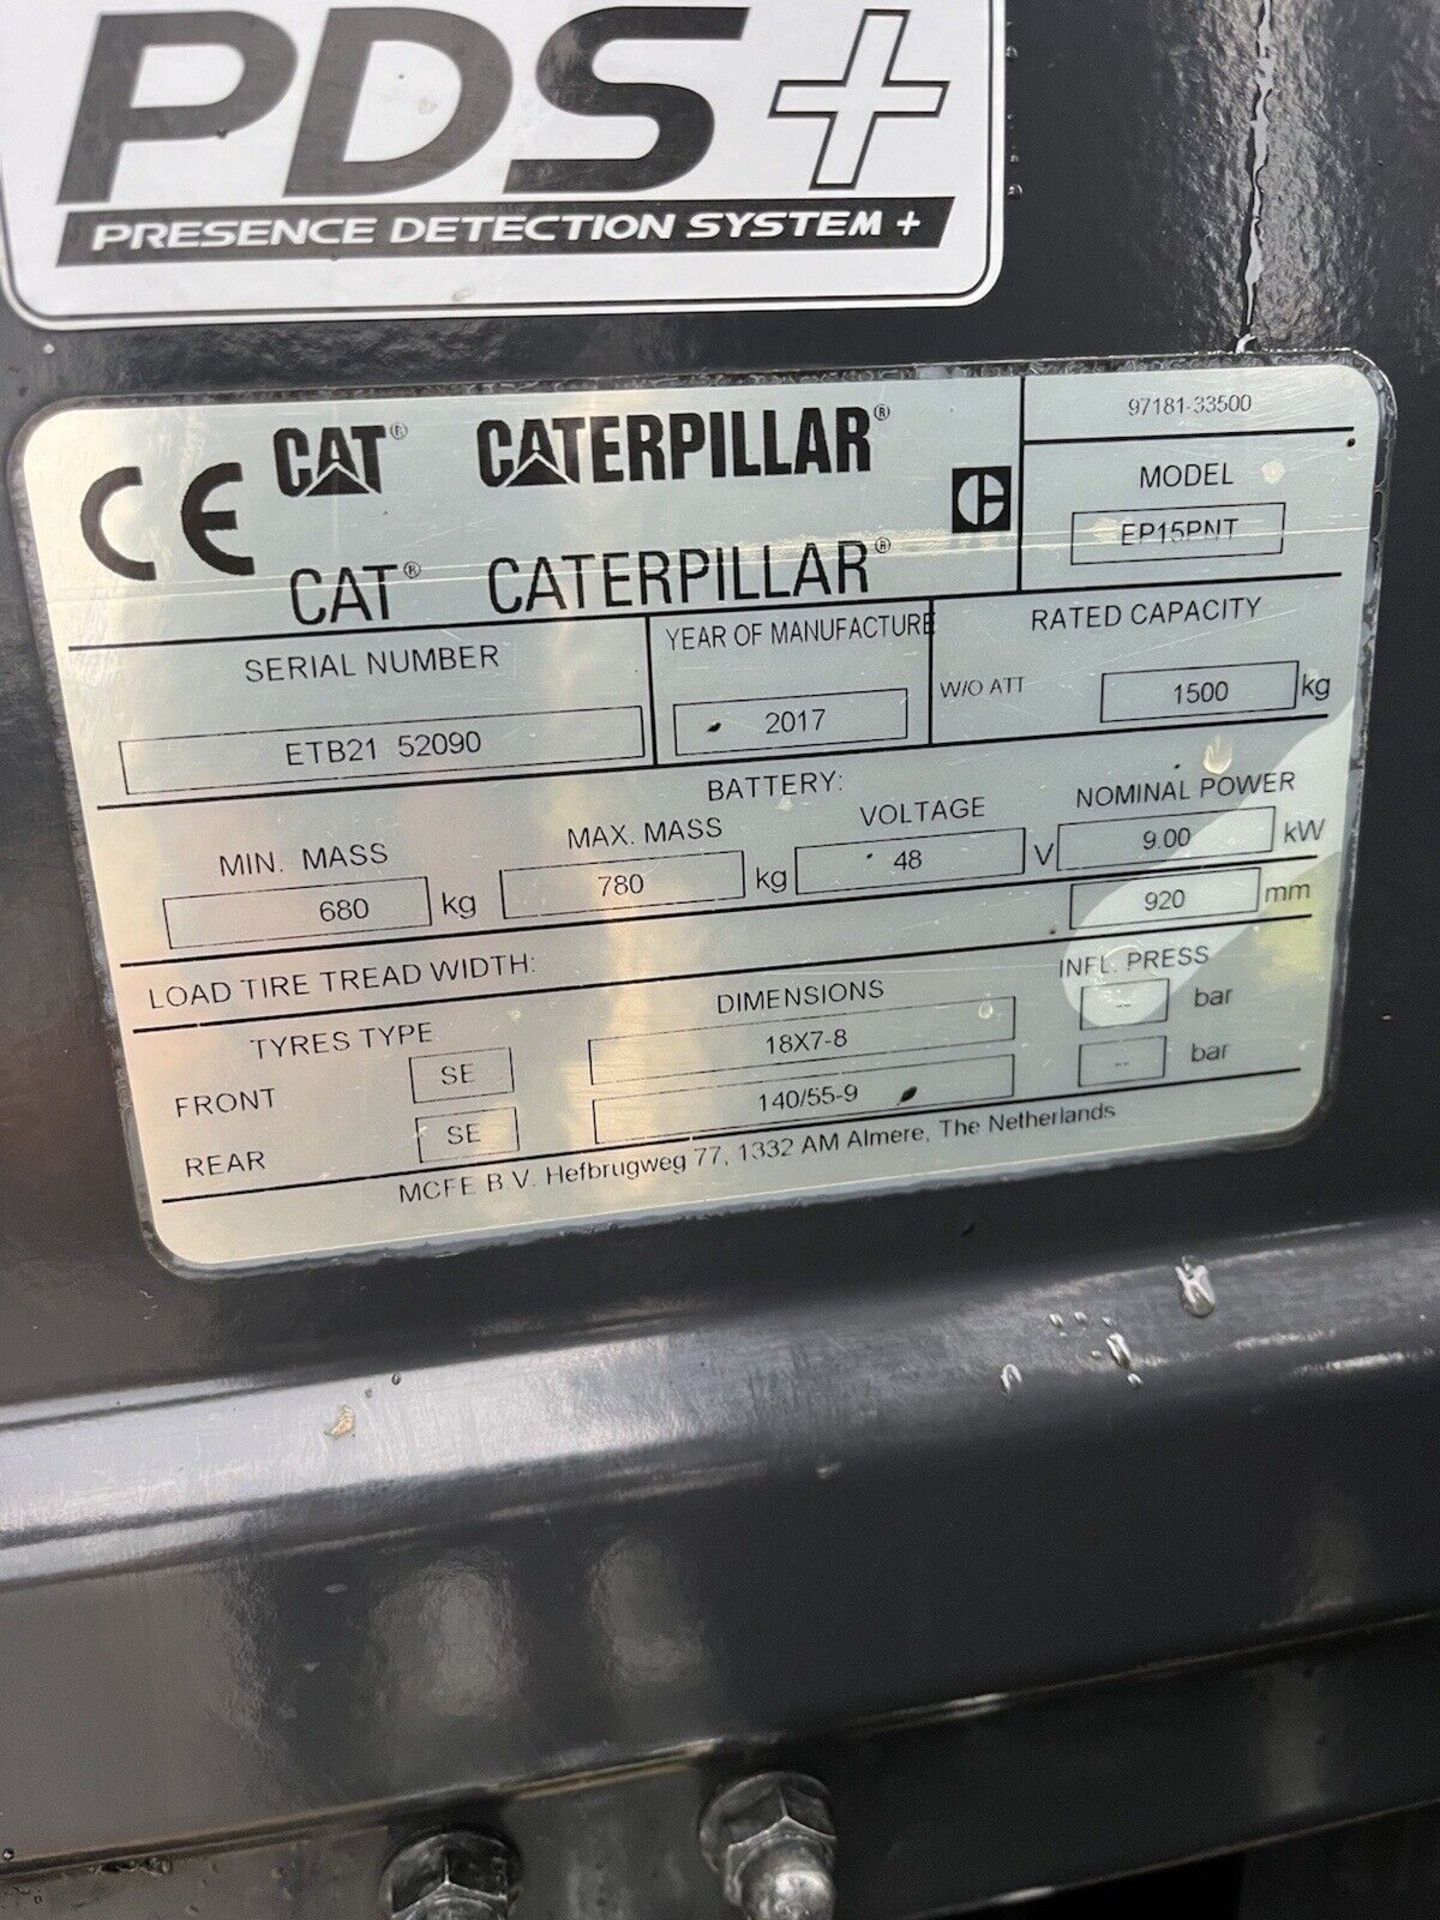 2017, CATERPILLAR 1.5 Electric Forklift Truck (Container Spec) - Image 3 of 4